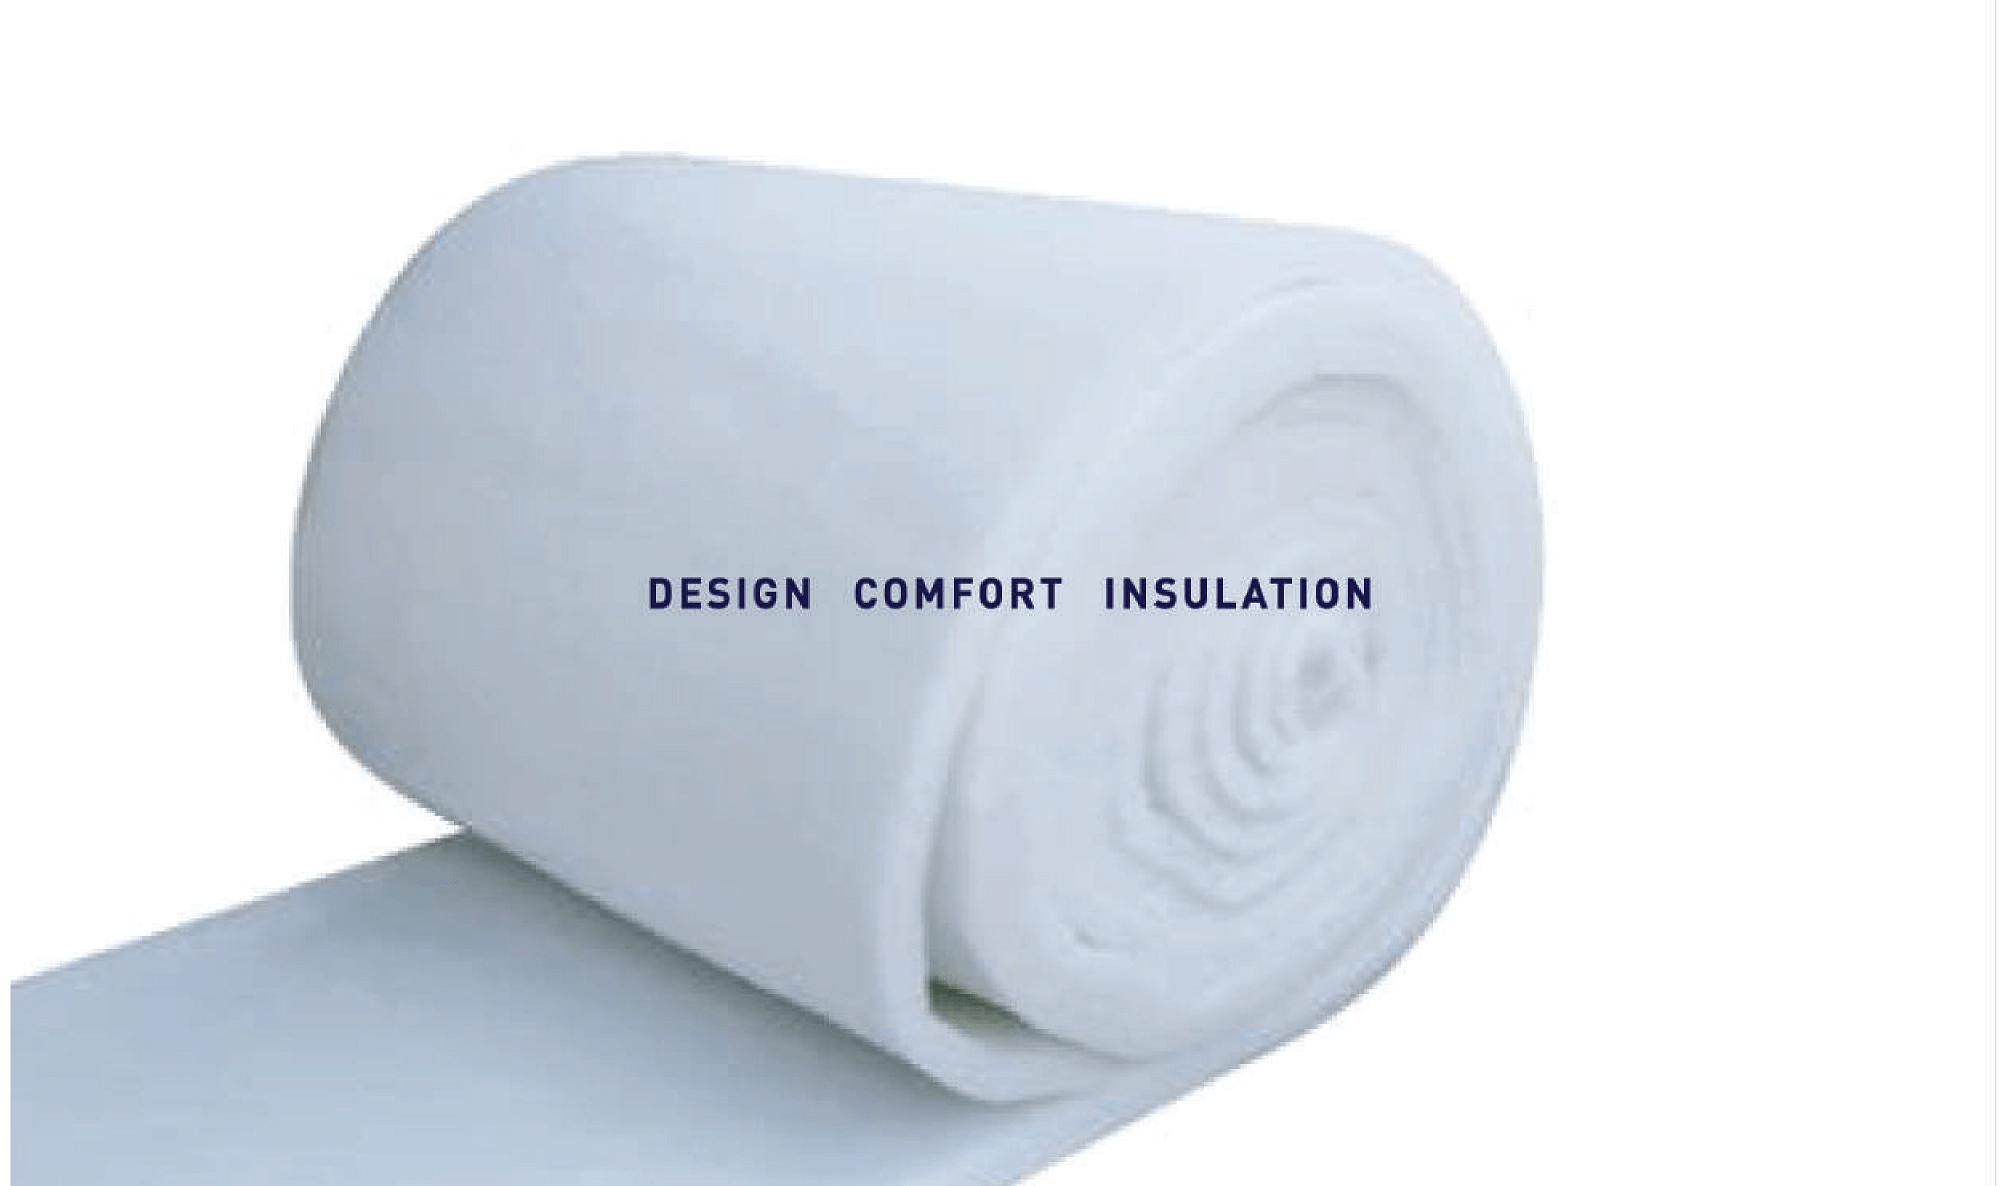 https://innerengineering.co.in/wp-content/uploads/2023/03/insound-polywool-product-image-01-1.png